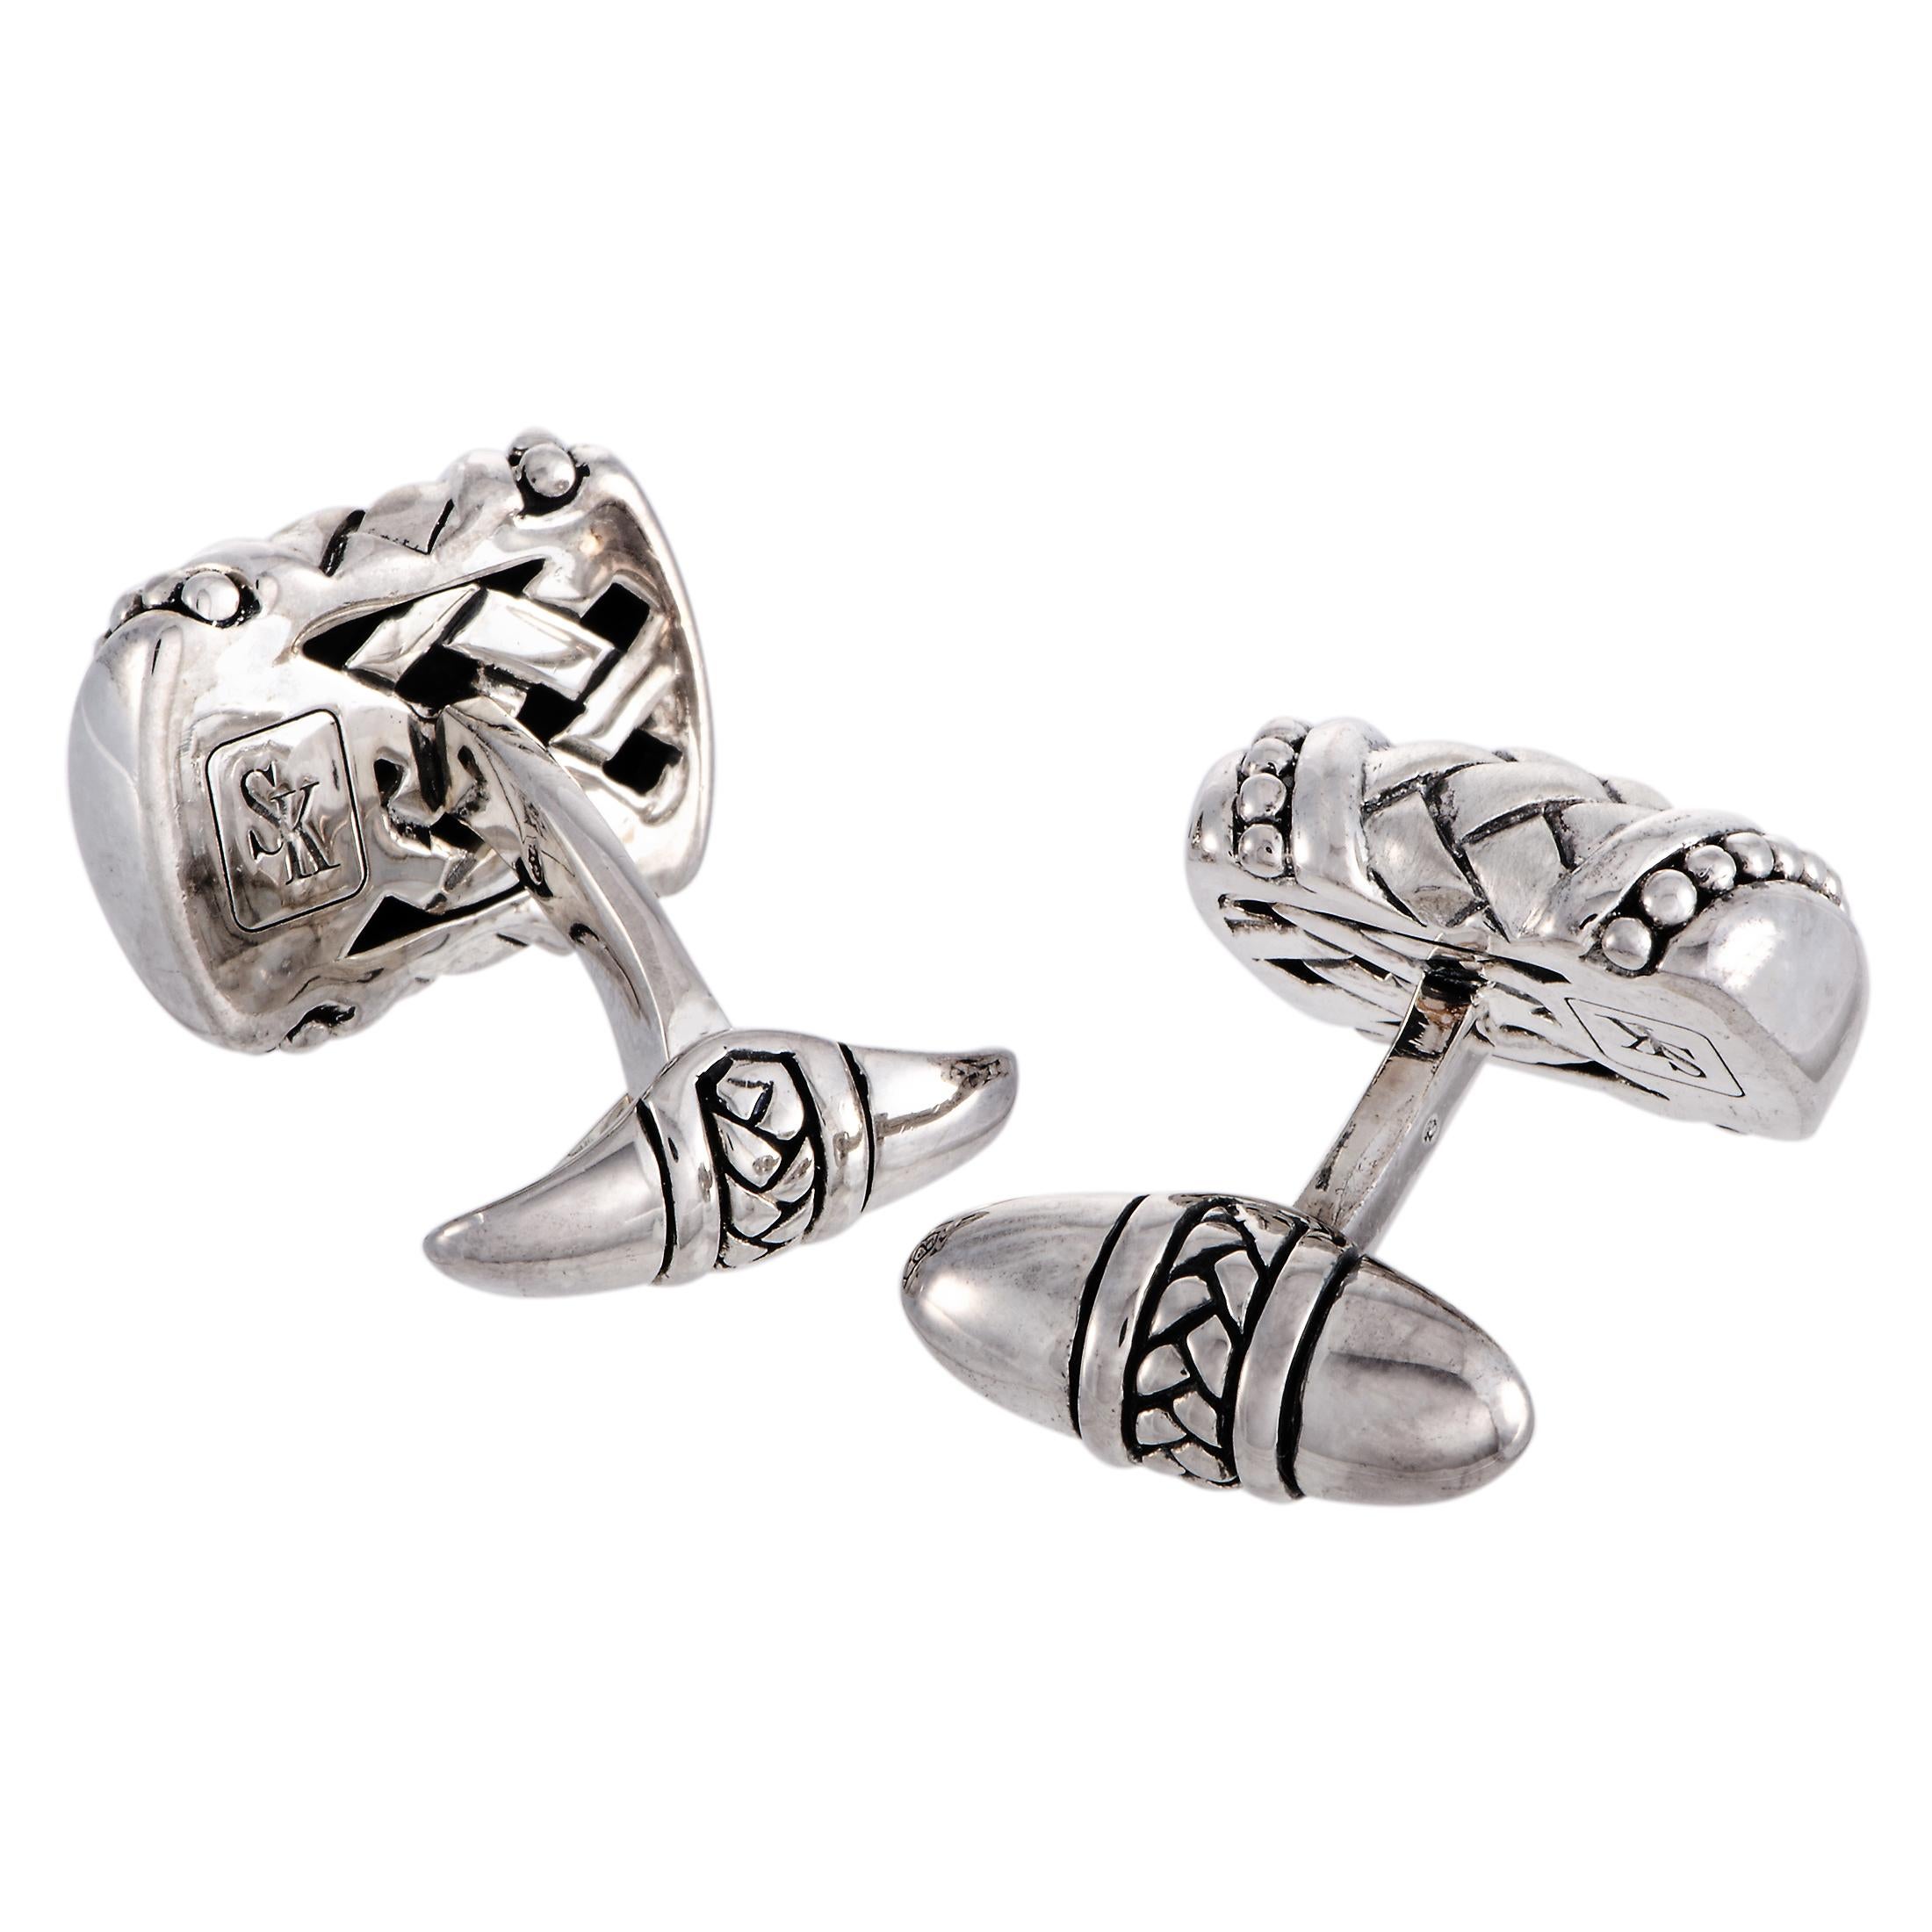 These Scott Kay cufflinks are crafted from sterling silver and each of the two weighs 10.15 grams. The cufflinks measure 0.75” in length and 0.55” in width.

Offered in brand new condition, this pair of cufflinks includes a gift box.